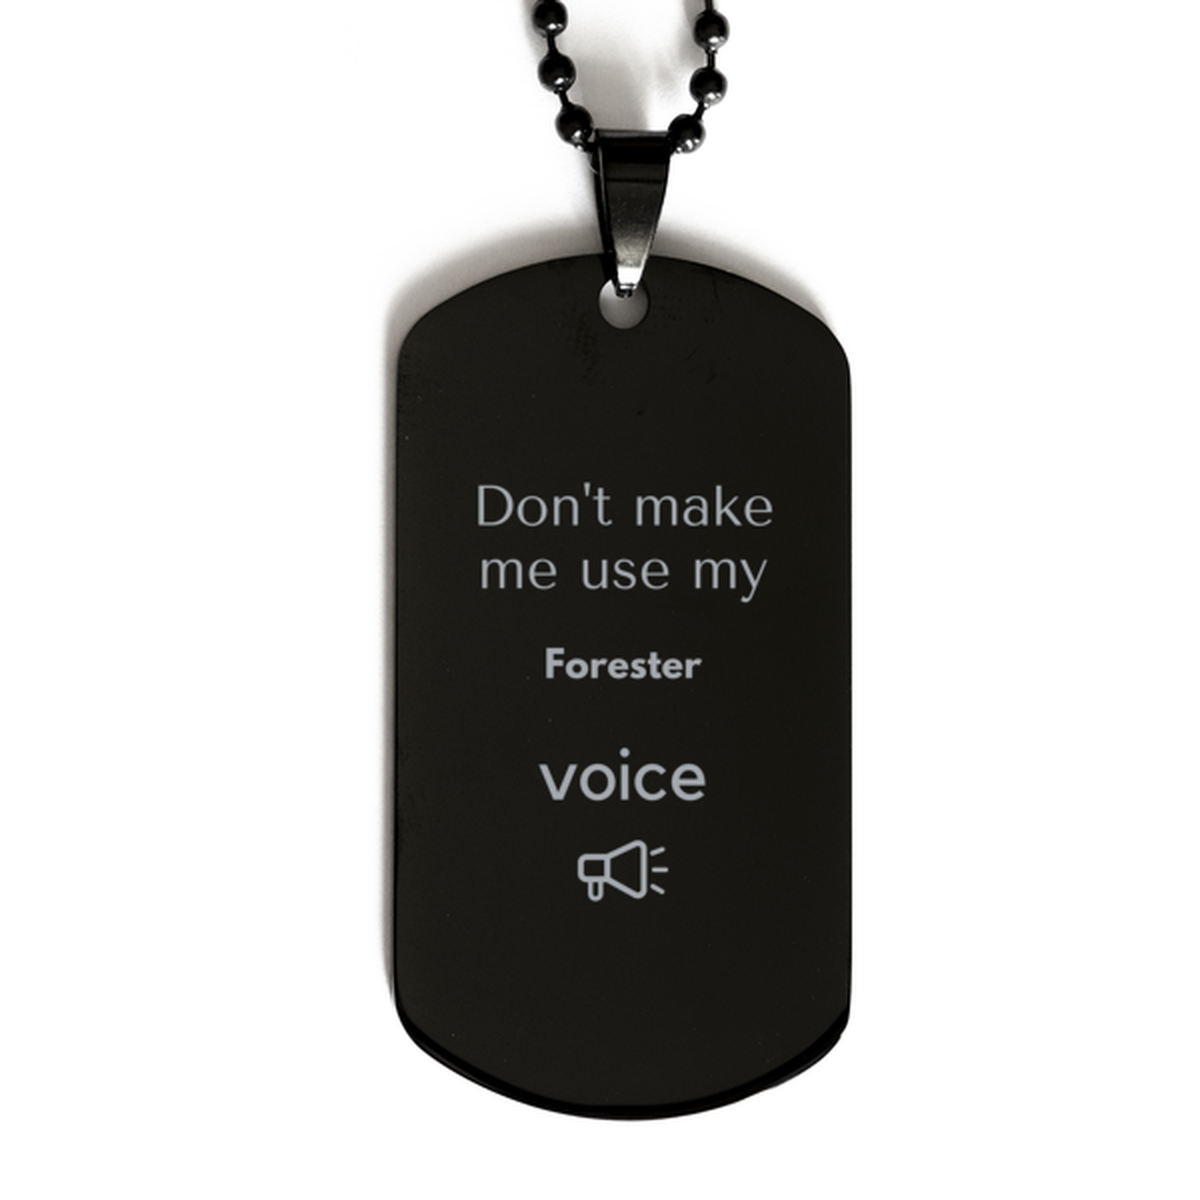 Don't make me use my Forester voice, Sarcasm Forester Gifts, Christmas Forester Black Dog Tag Birthday Unique Gifts For Forester Coworkers, Men, Women, Colleague, Friends